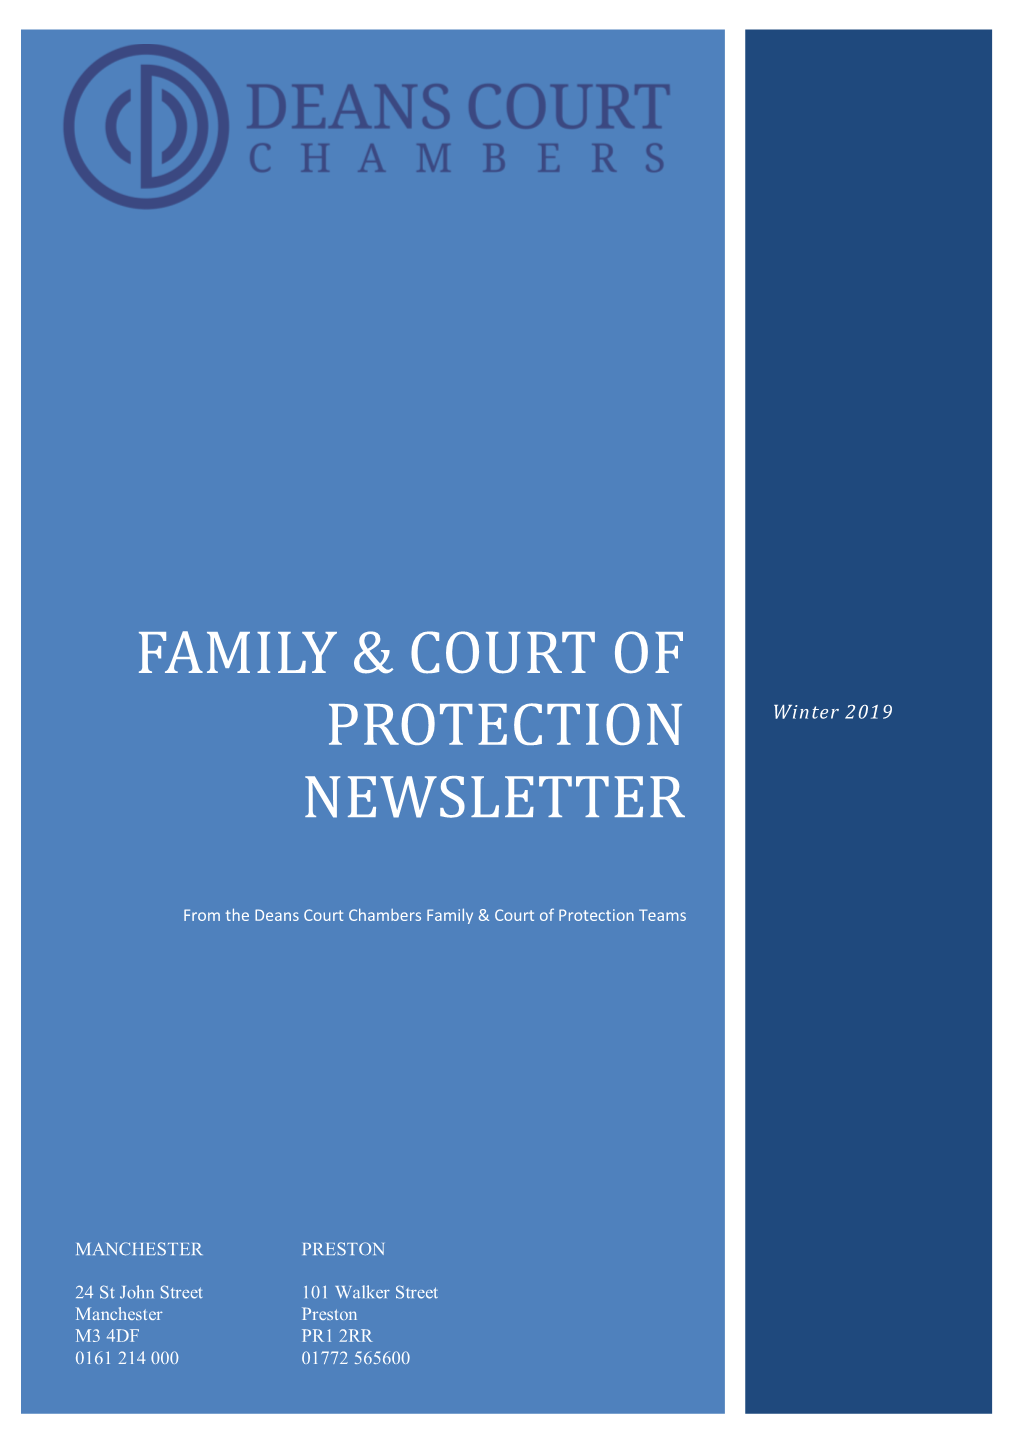 Family & COURT of PROTECTION